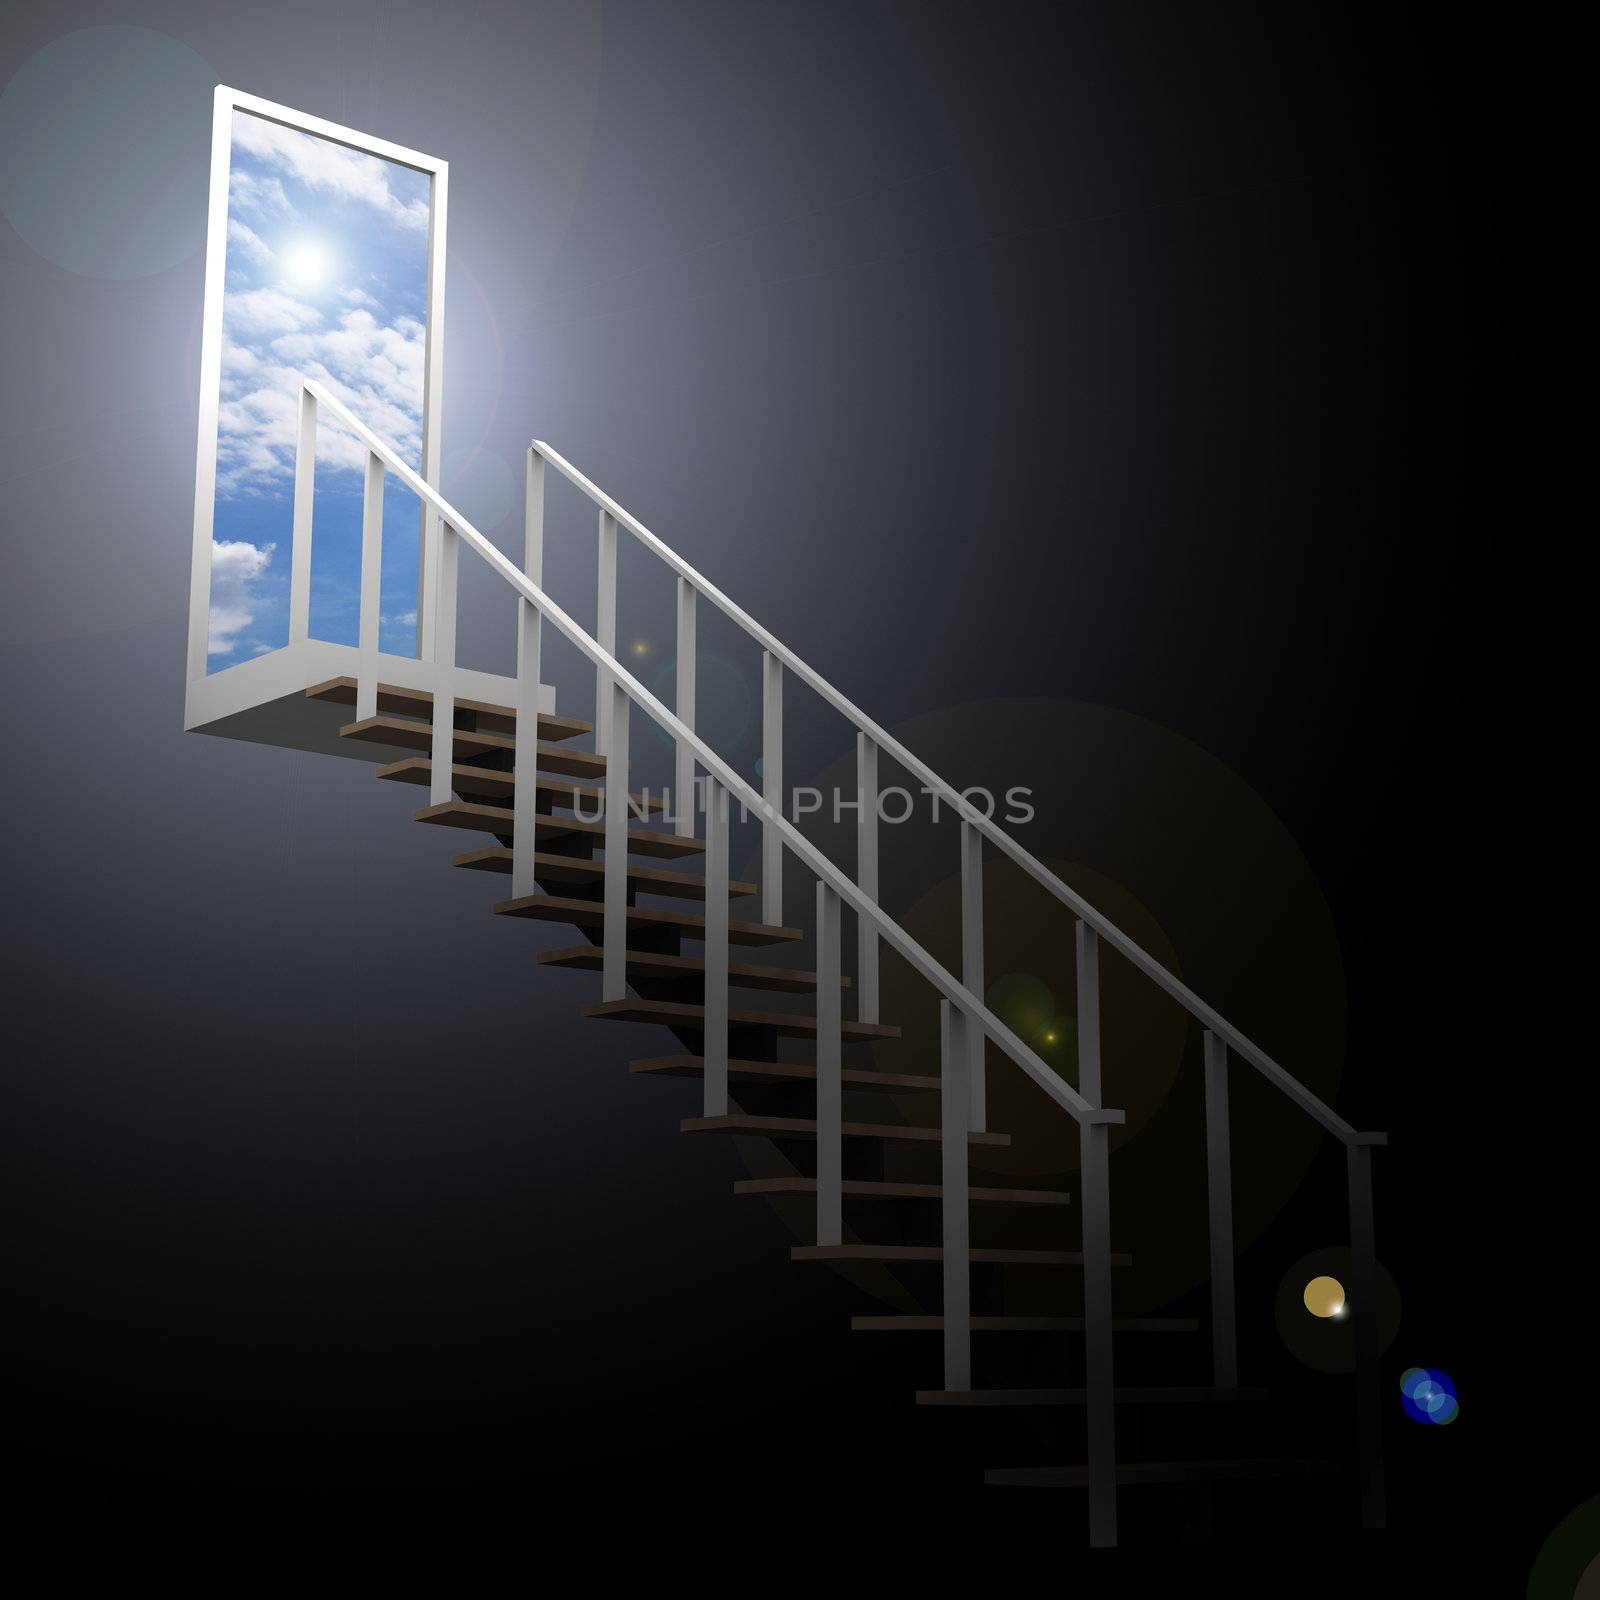 Ladder leading up to the sky from darkness, a business in success.